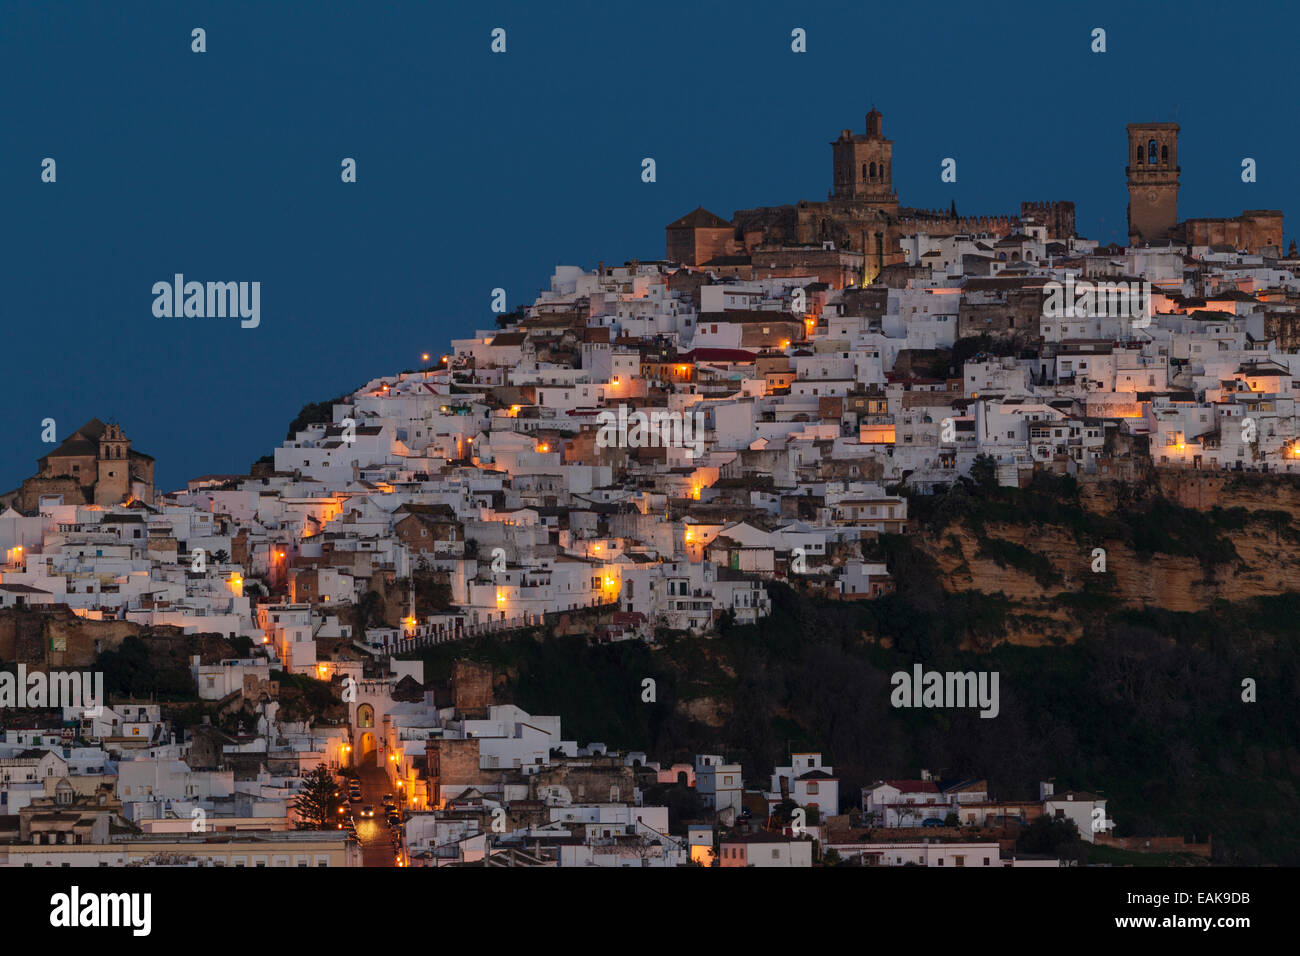 Whitewashed village of Arcos de la Frontera on a limestone rock at dawn, Arcos de la Frontera, Cádiz province, Andalusia, Spain Stock Photo